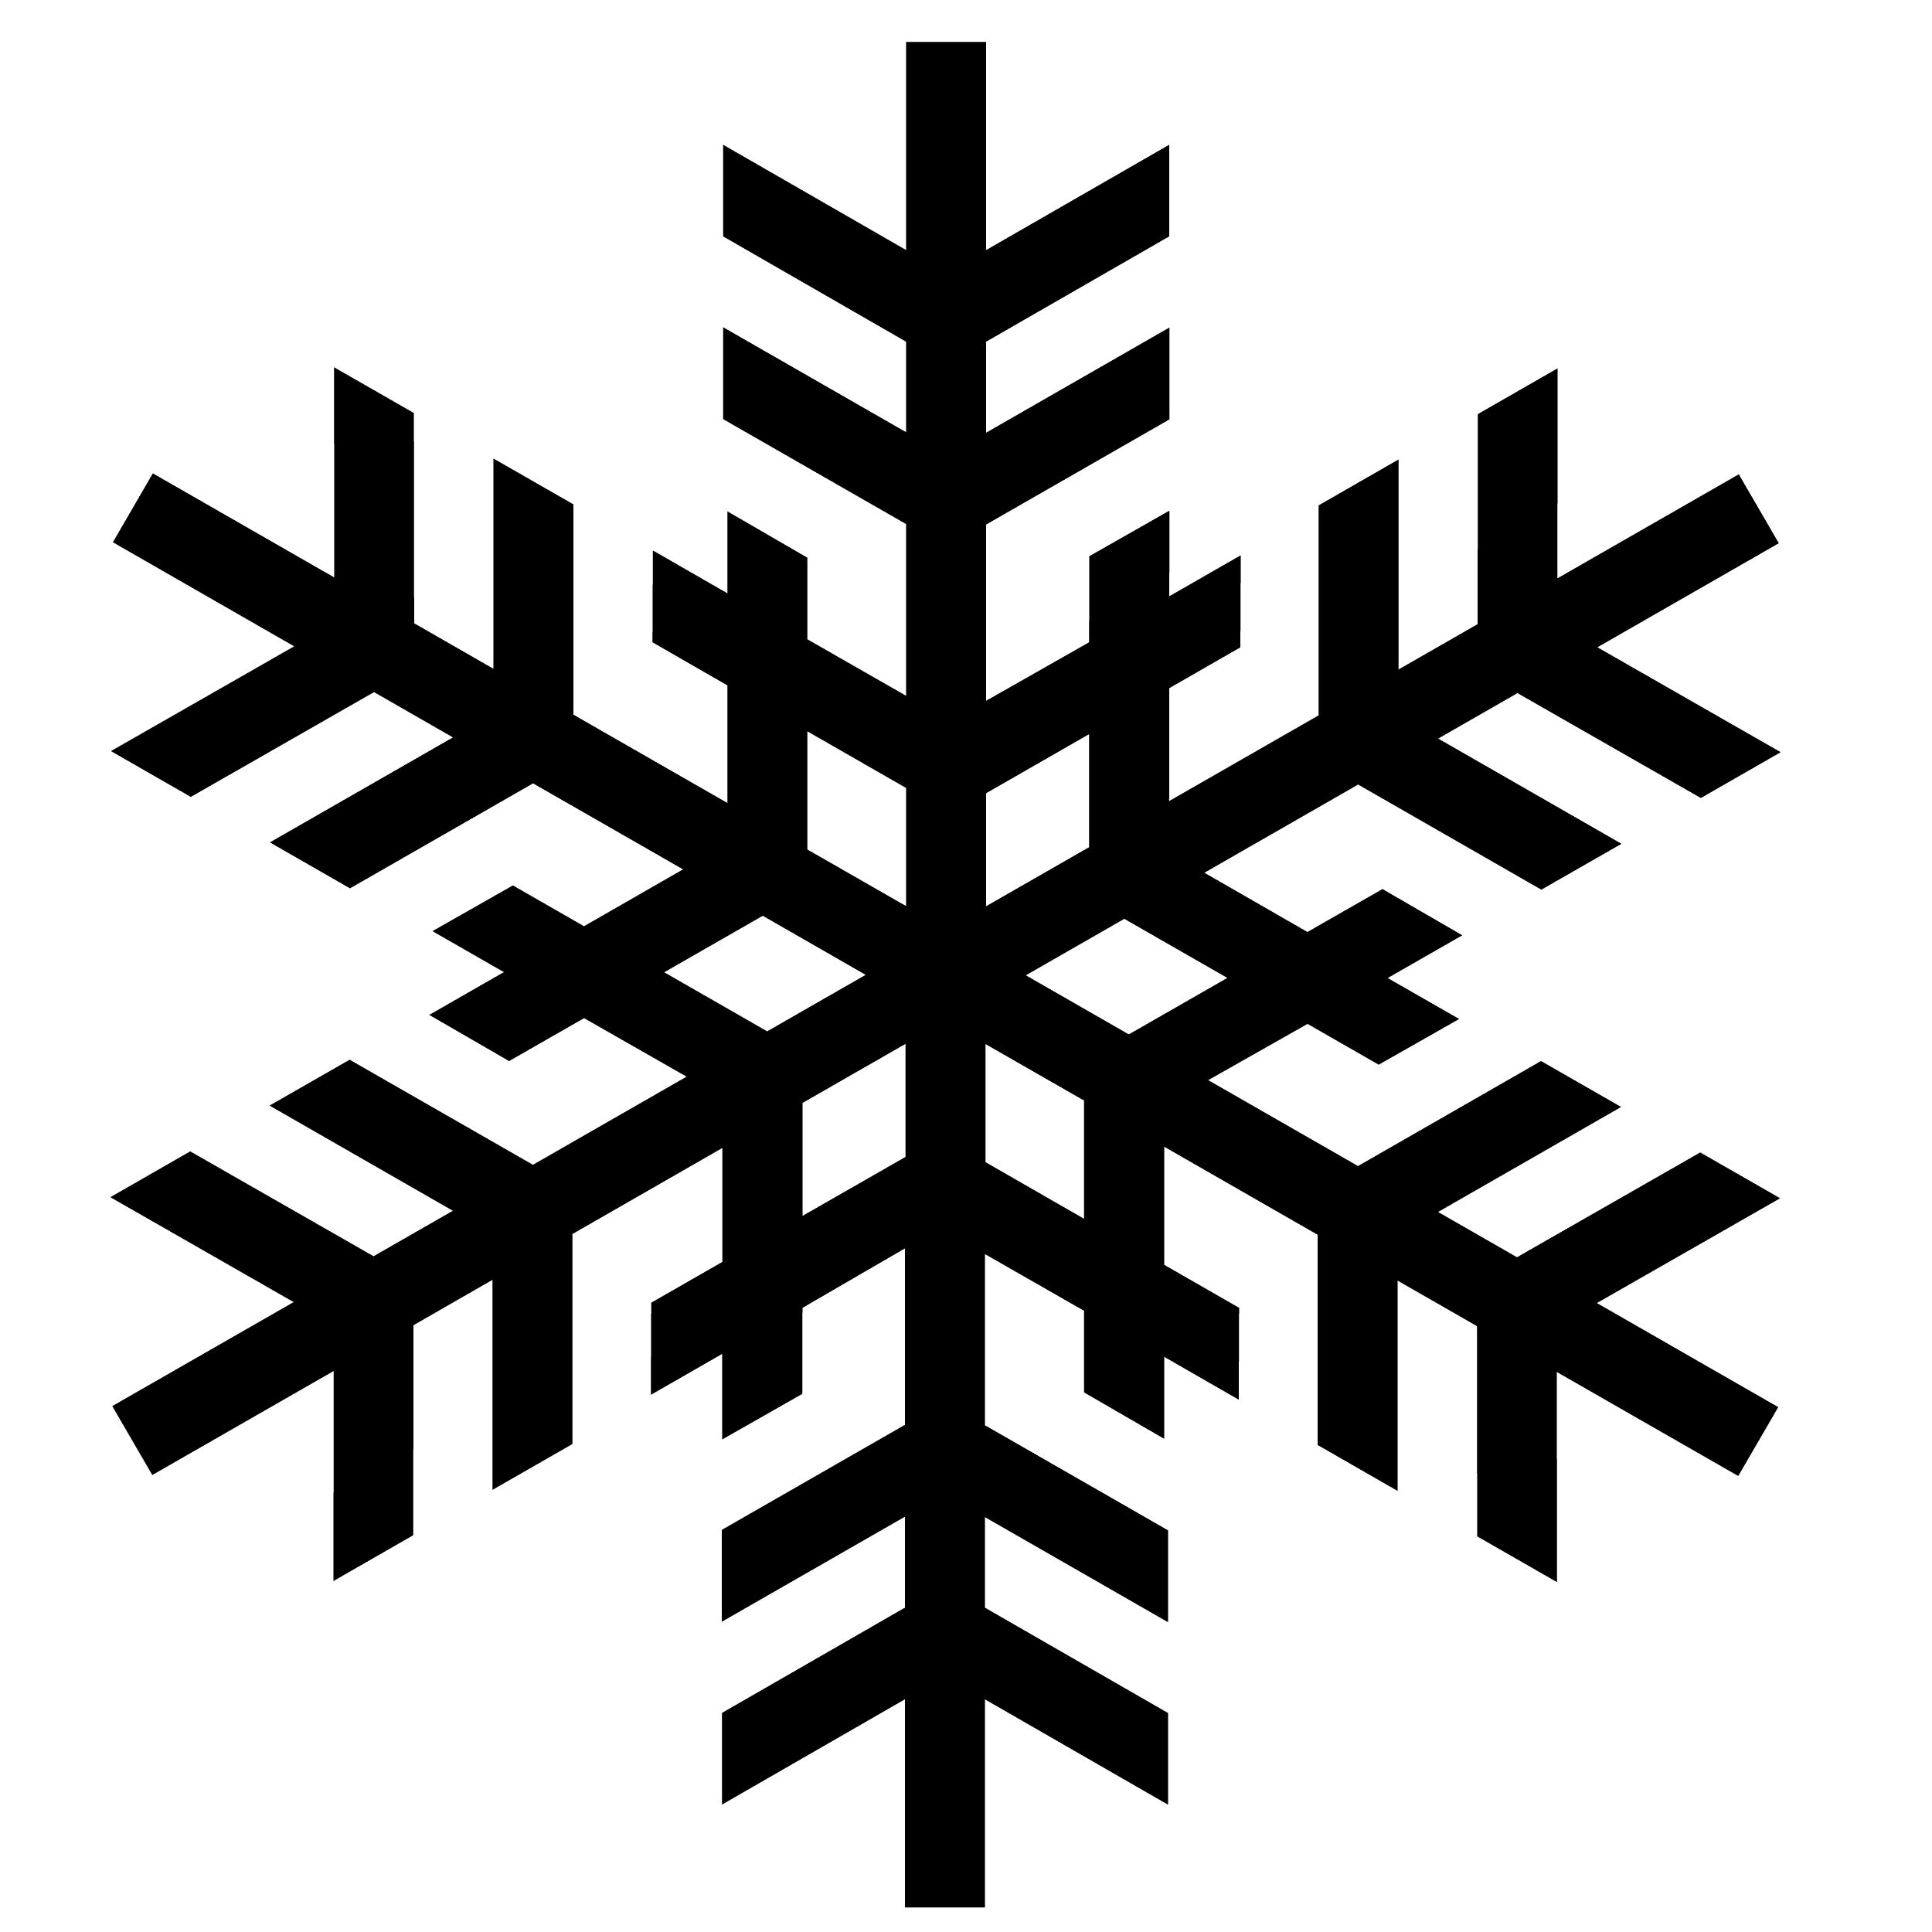 Snowflake Transparent Background Png Images & Pictures - Becuo